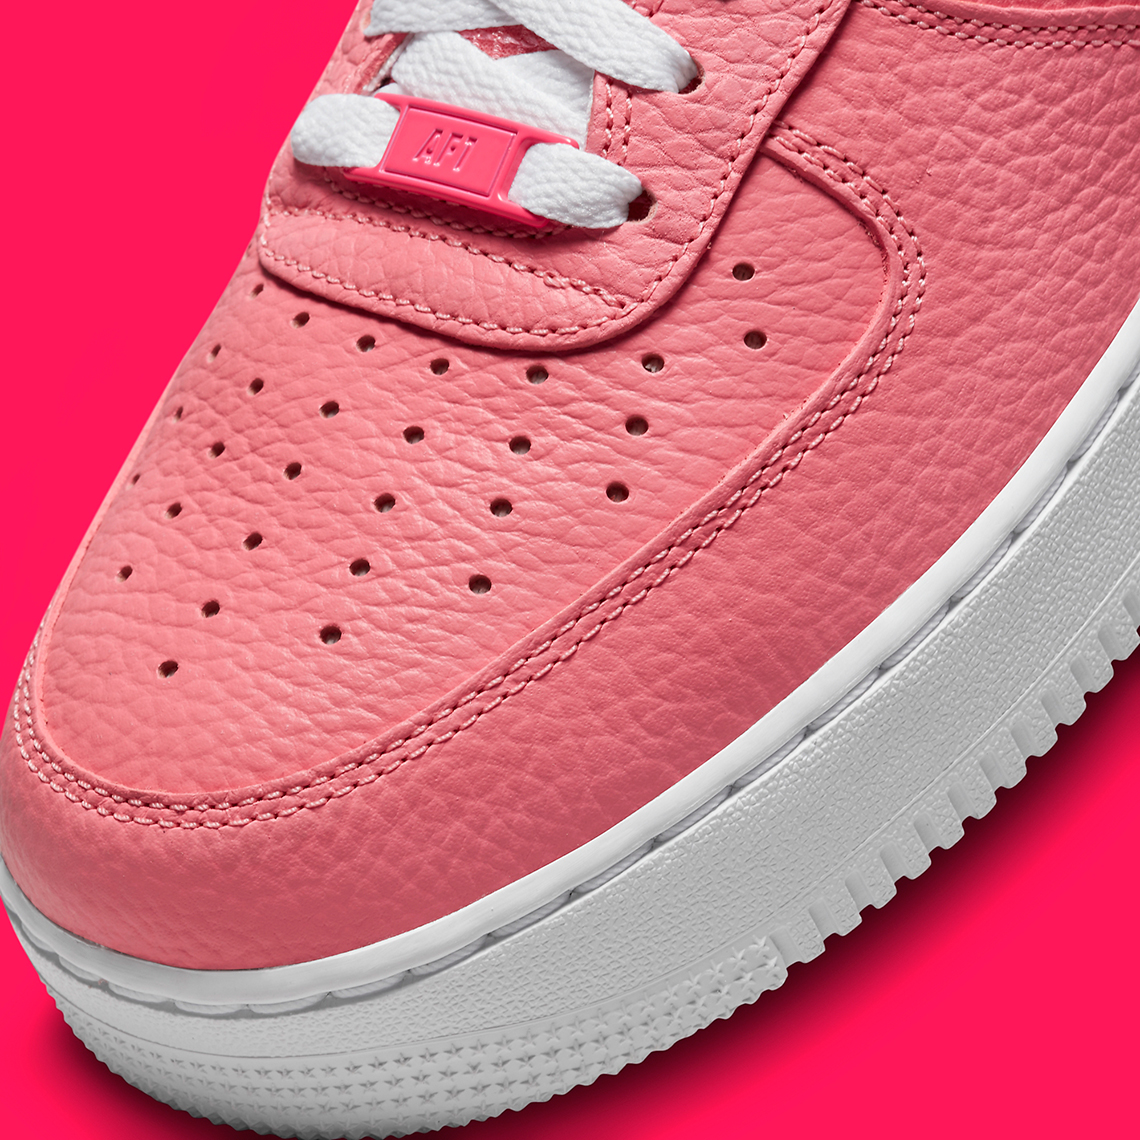 Nike Air Force 1 Low Pink Tumbled Leather Dz4861 600 7